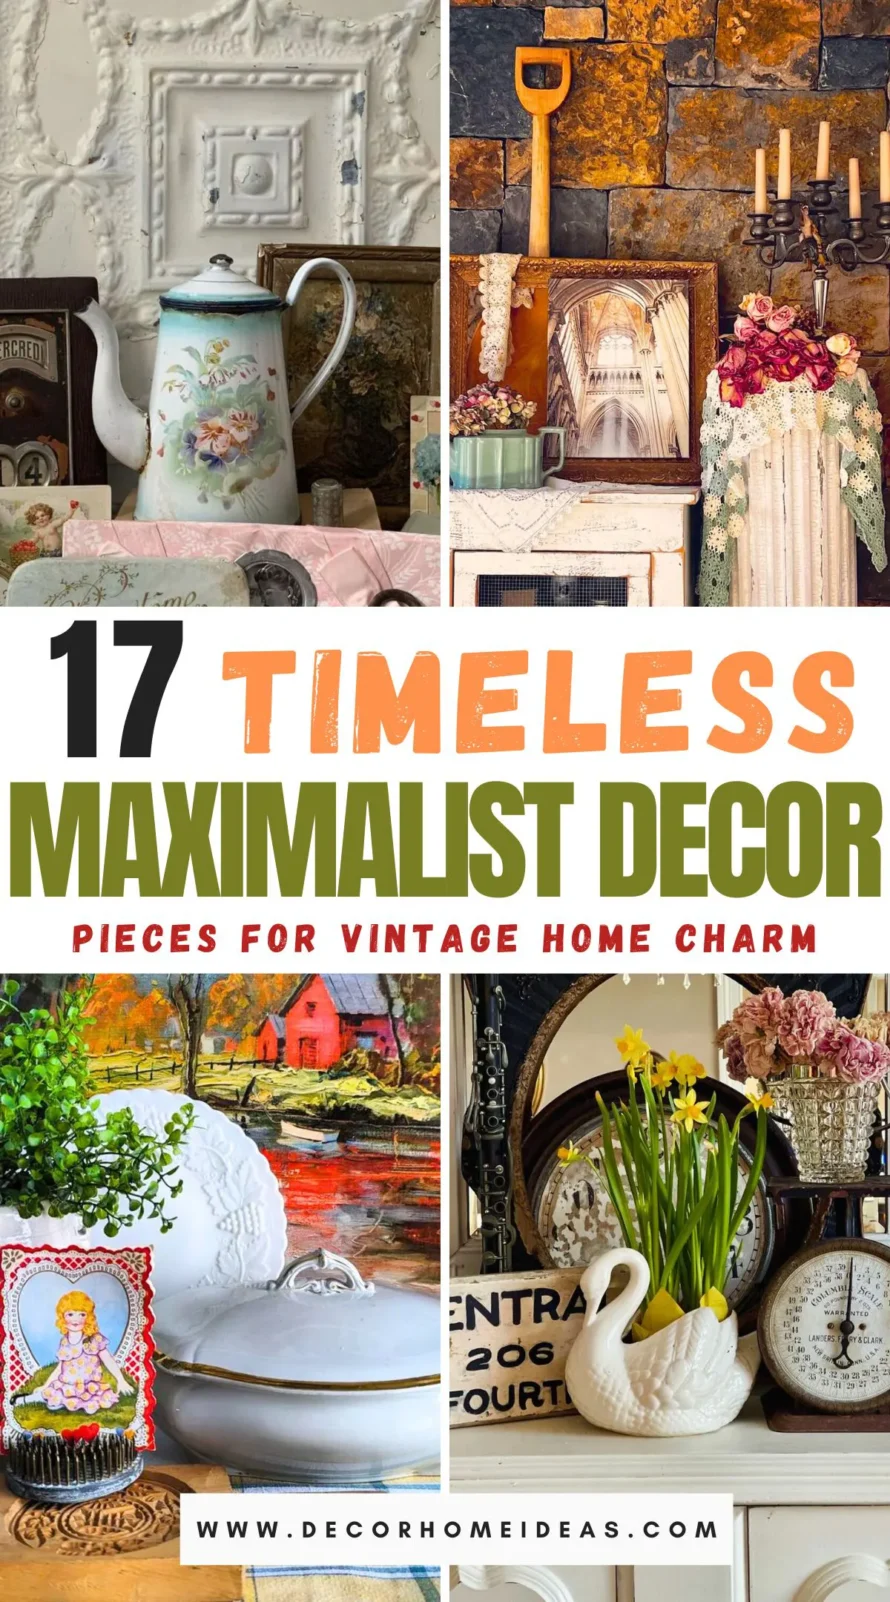 Discover 17 timeless maximalist decor pieces that infuse a vintage charm into your home. From ornate mirrors to eclectic rugs, these statement pieces add character and personality to any space, embracing bold patterns, rich textures, and vibrant colors for a truly unique aesthetic.